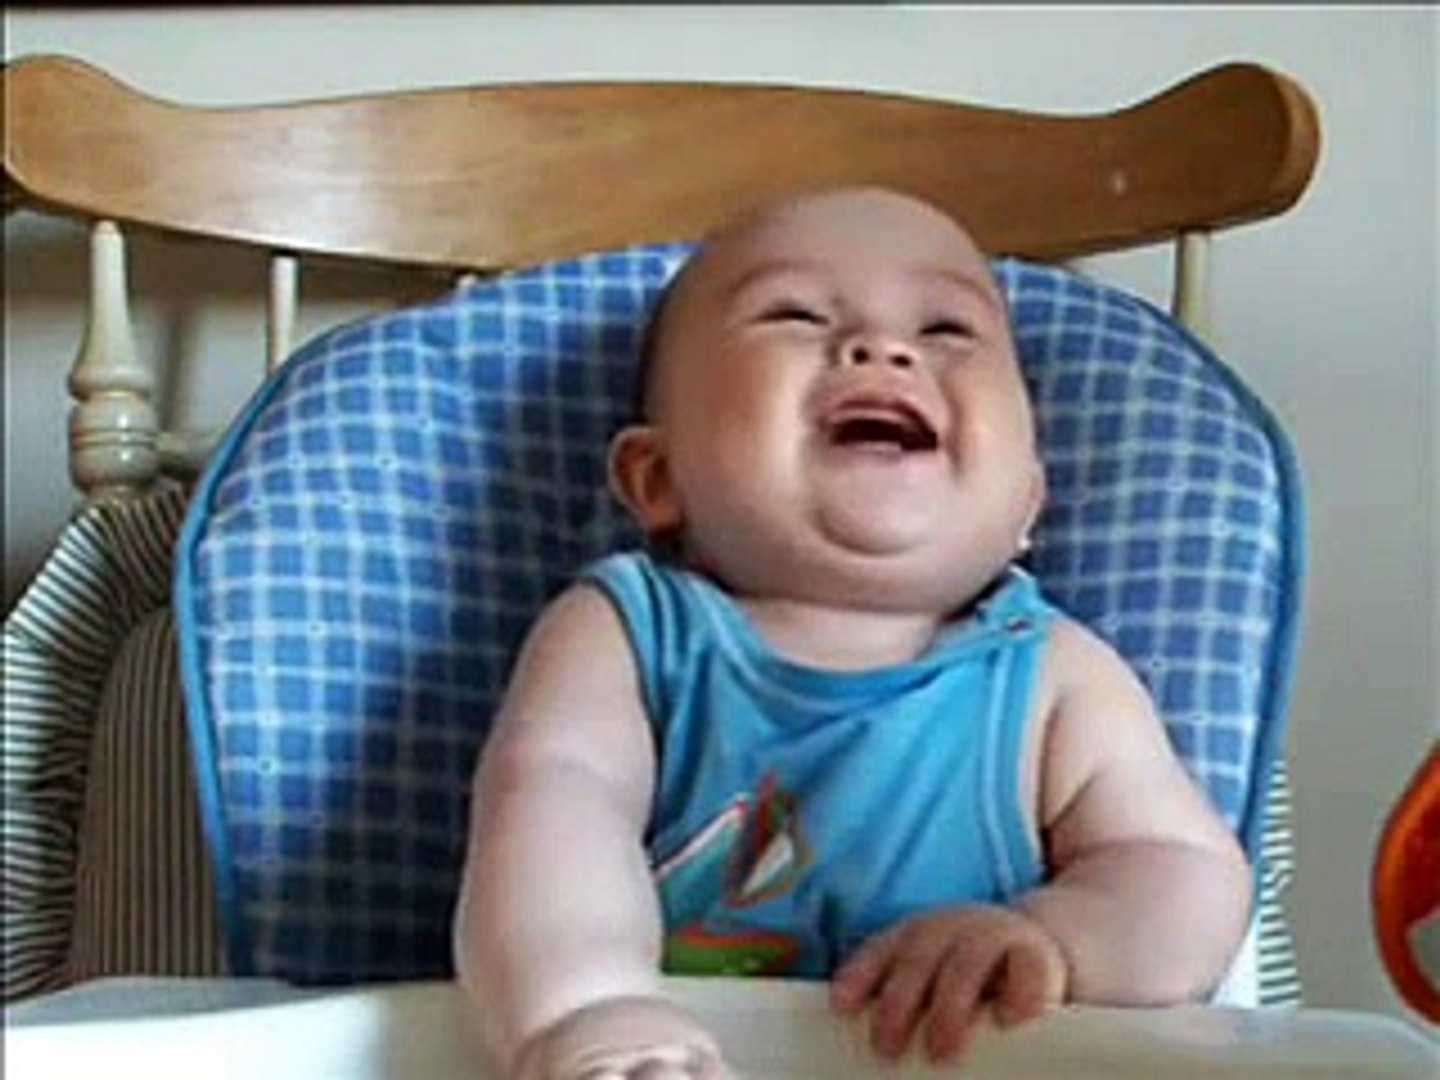 aydan s funny laugh - he s a happy baby! best baby laugh! - video  Dailymotion